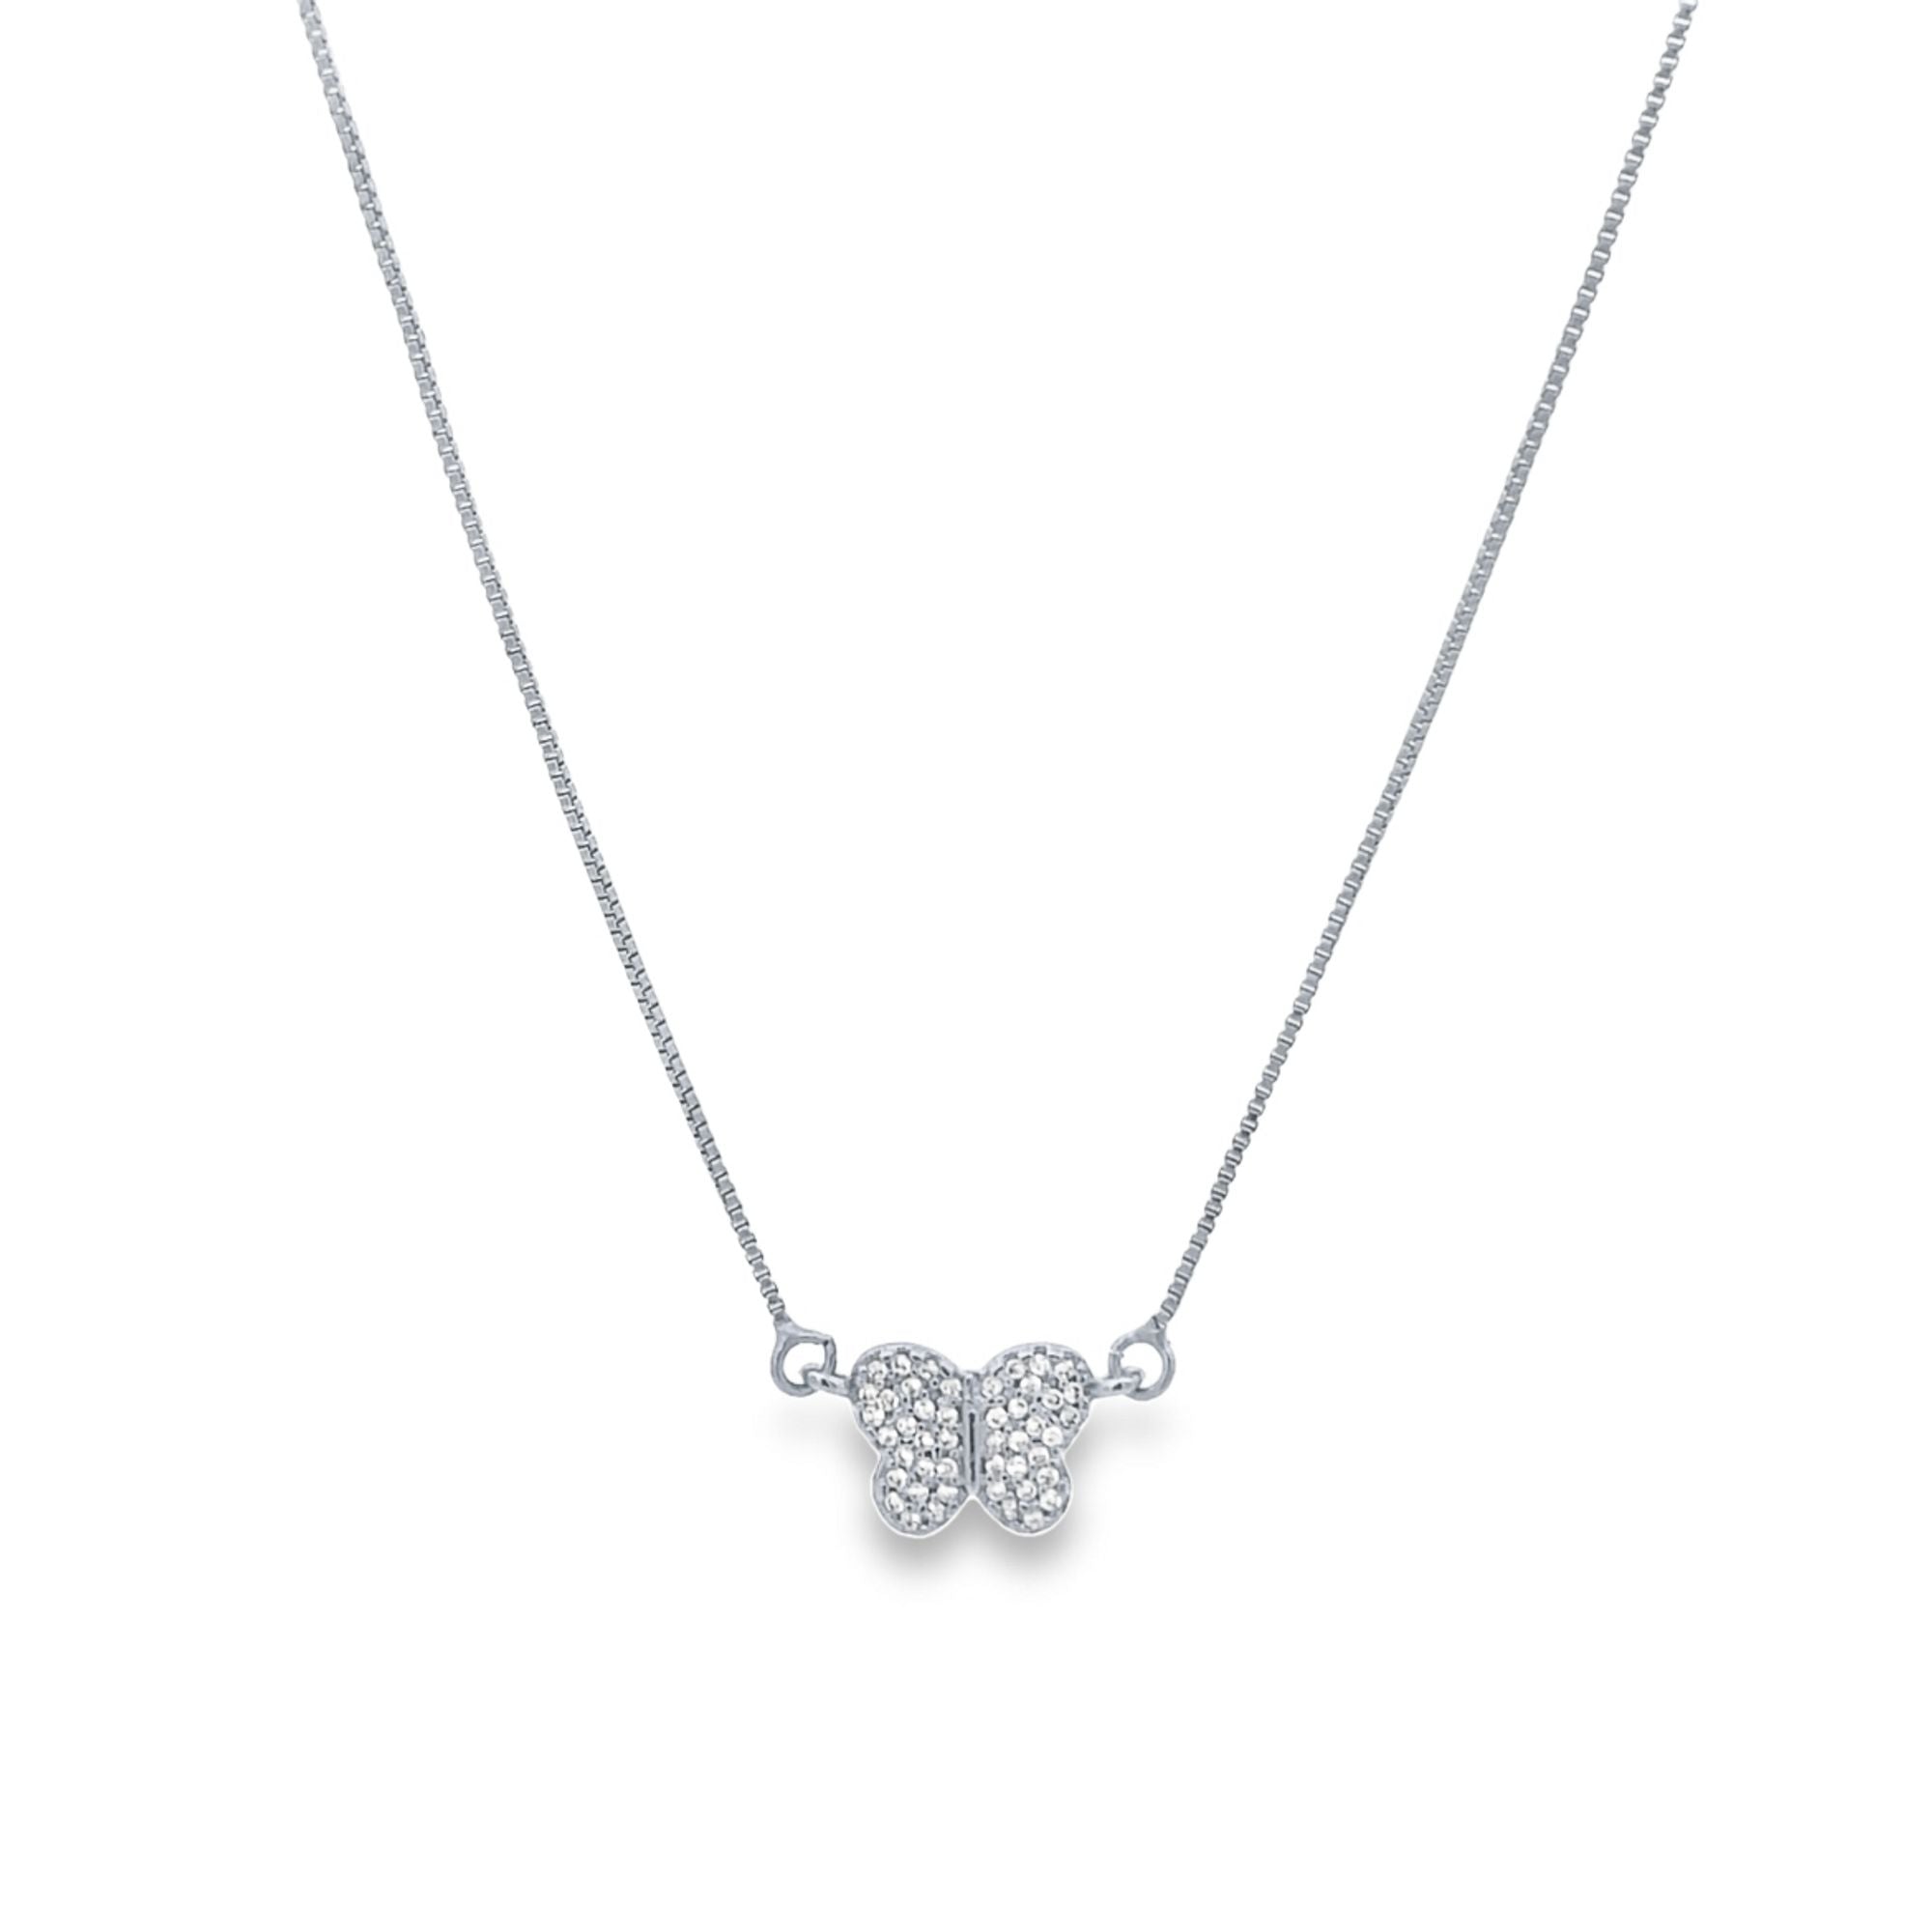 Butterfly Necklace With CZ Stones (G134)